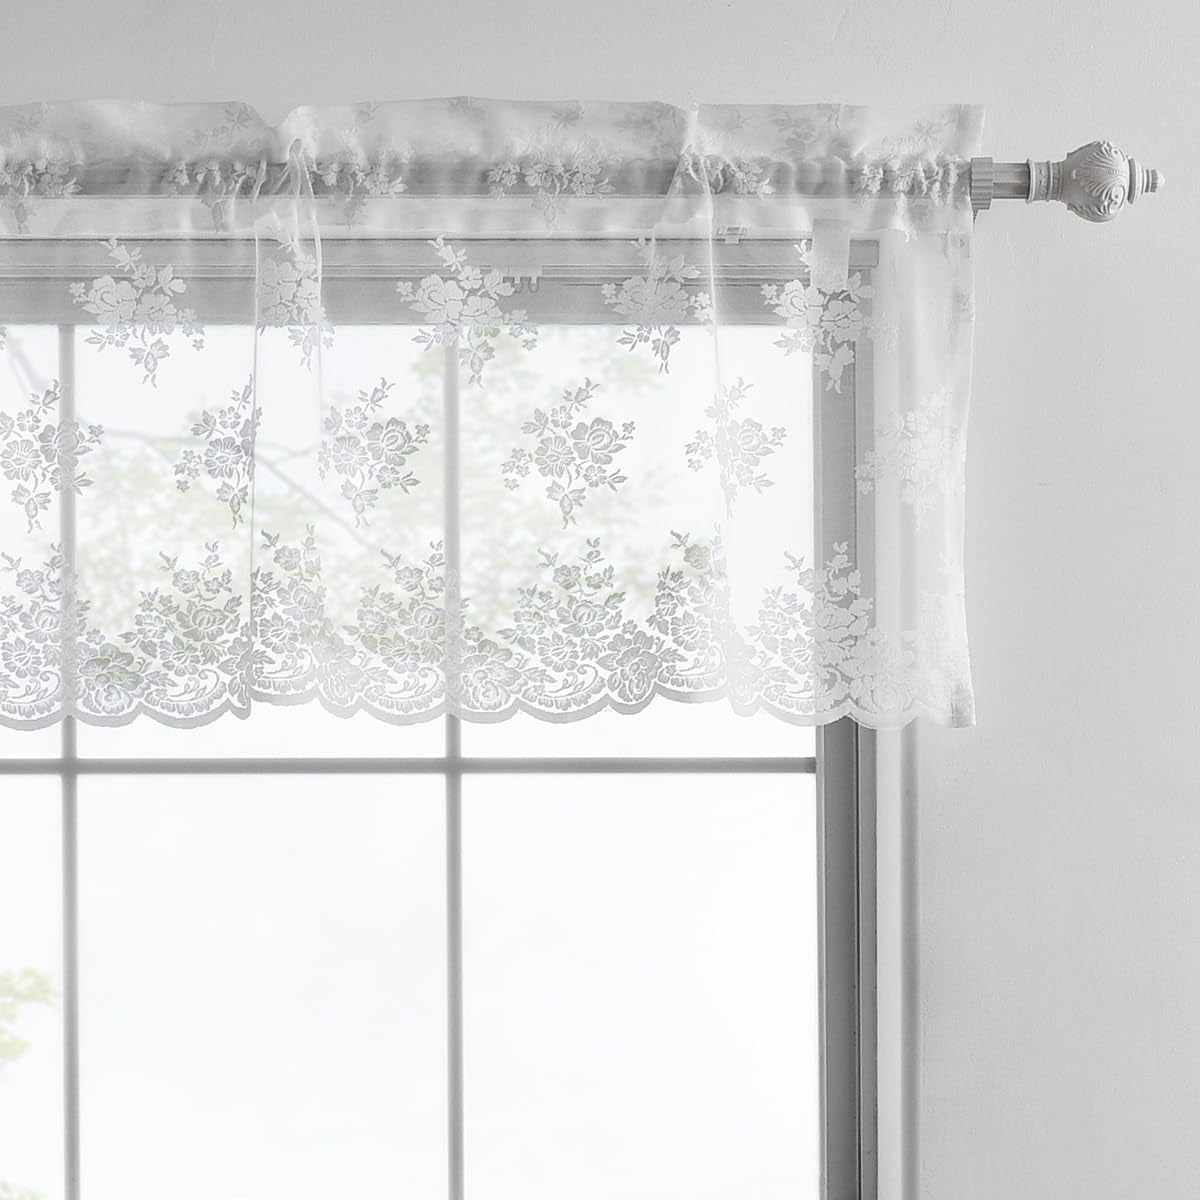 Kotile Sage Green Sheer Valance Curtain for Windows, Rustic Floral Spring Sheer Window Valance Curtain 18 Inch Length, Light Filtering Rod Pocket Lace Valance, 52 X 18 Inch, 1 Panel, Sage Green  Kotile Textile White 52 In X 18 In (W X L) 